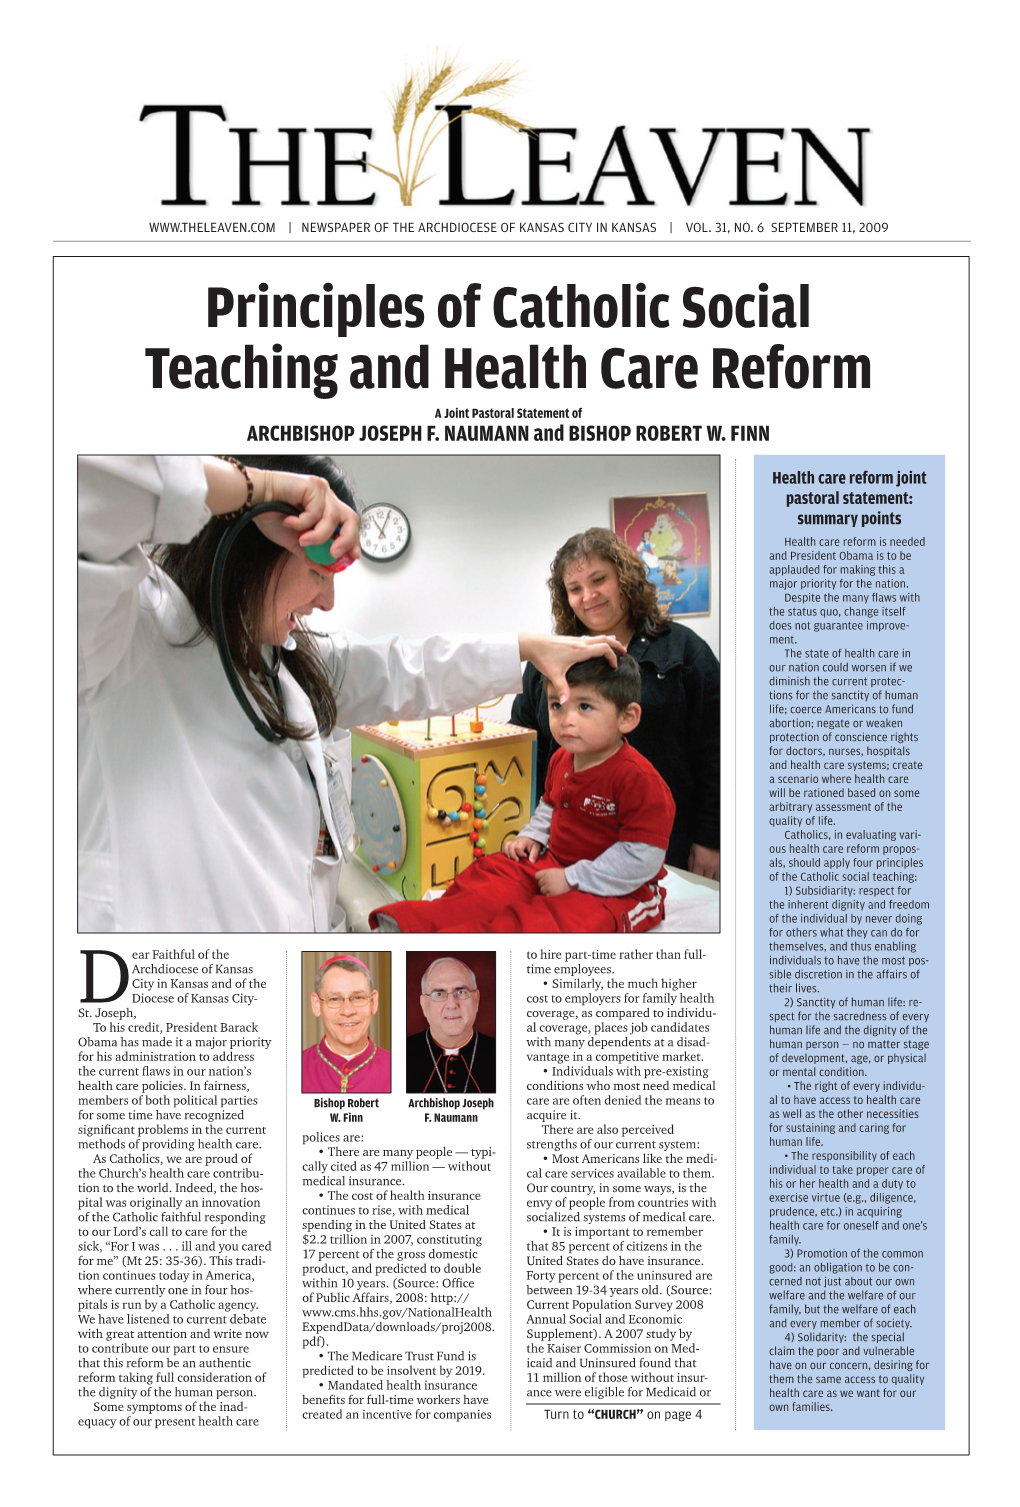 Principles of Catholic Social Teaching and Health Care Reform a Joint Pastoral Statement of Archbishop Joseph F